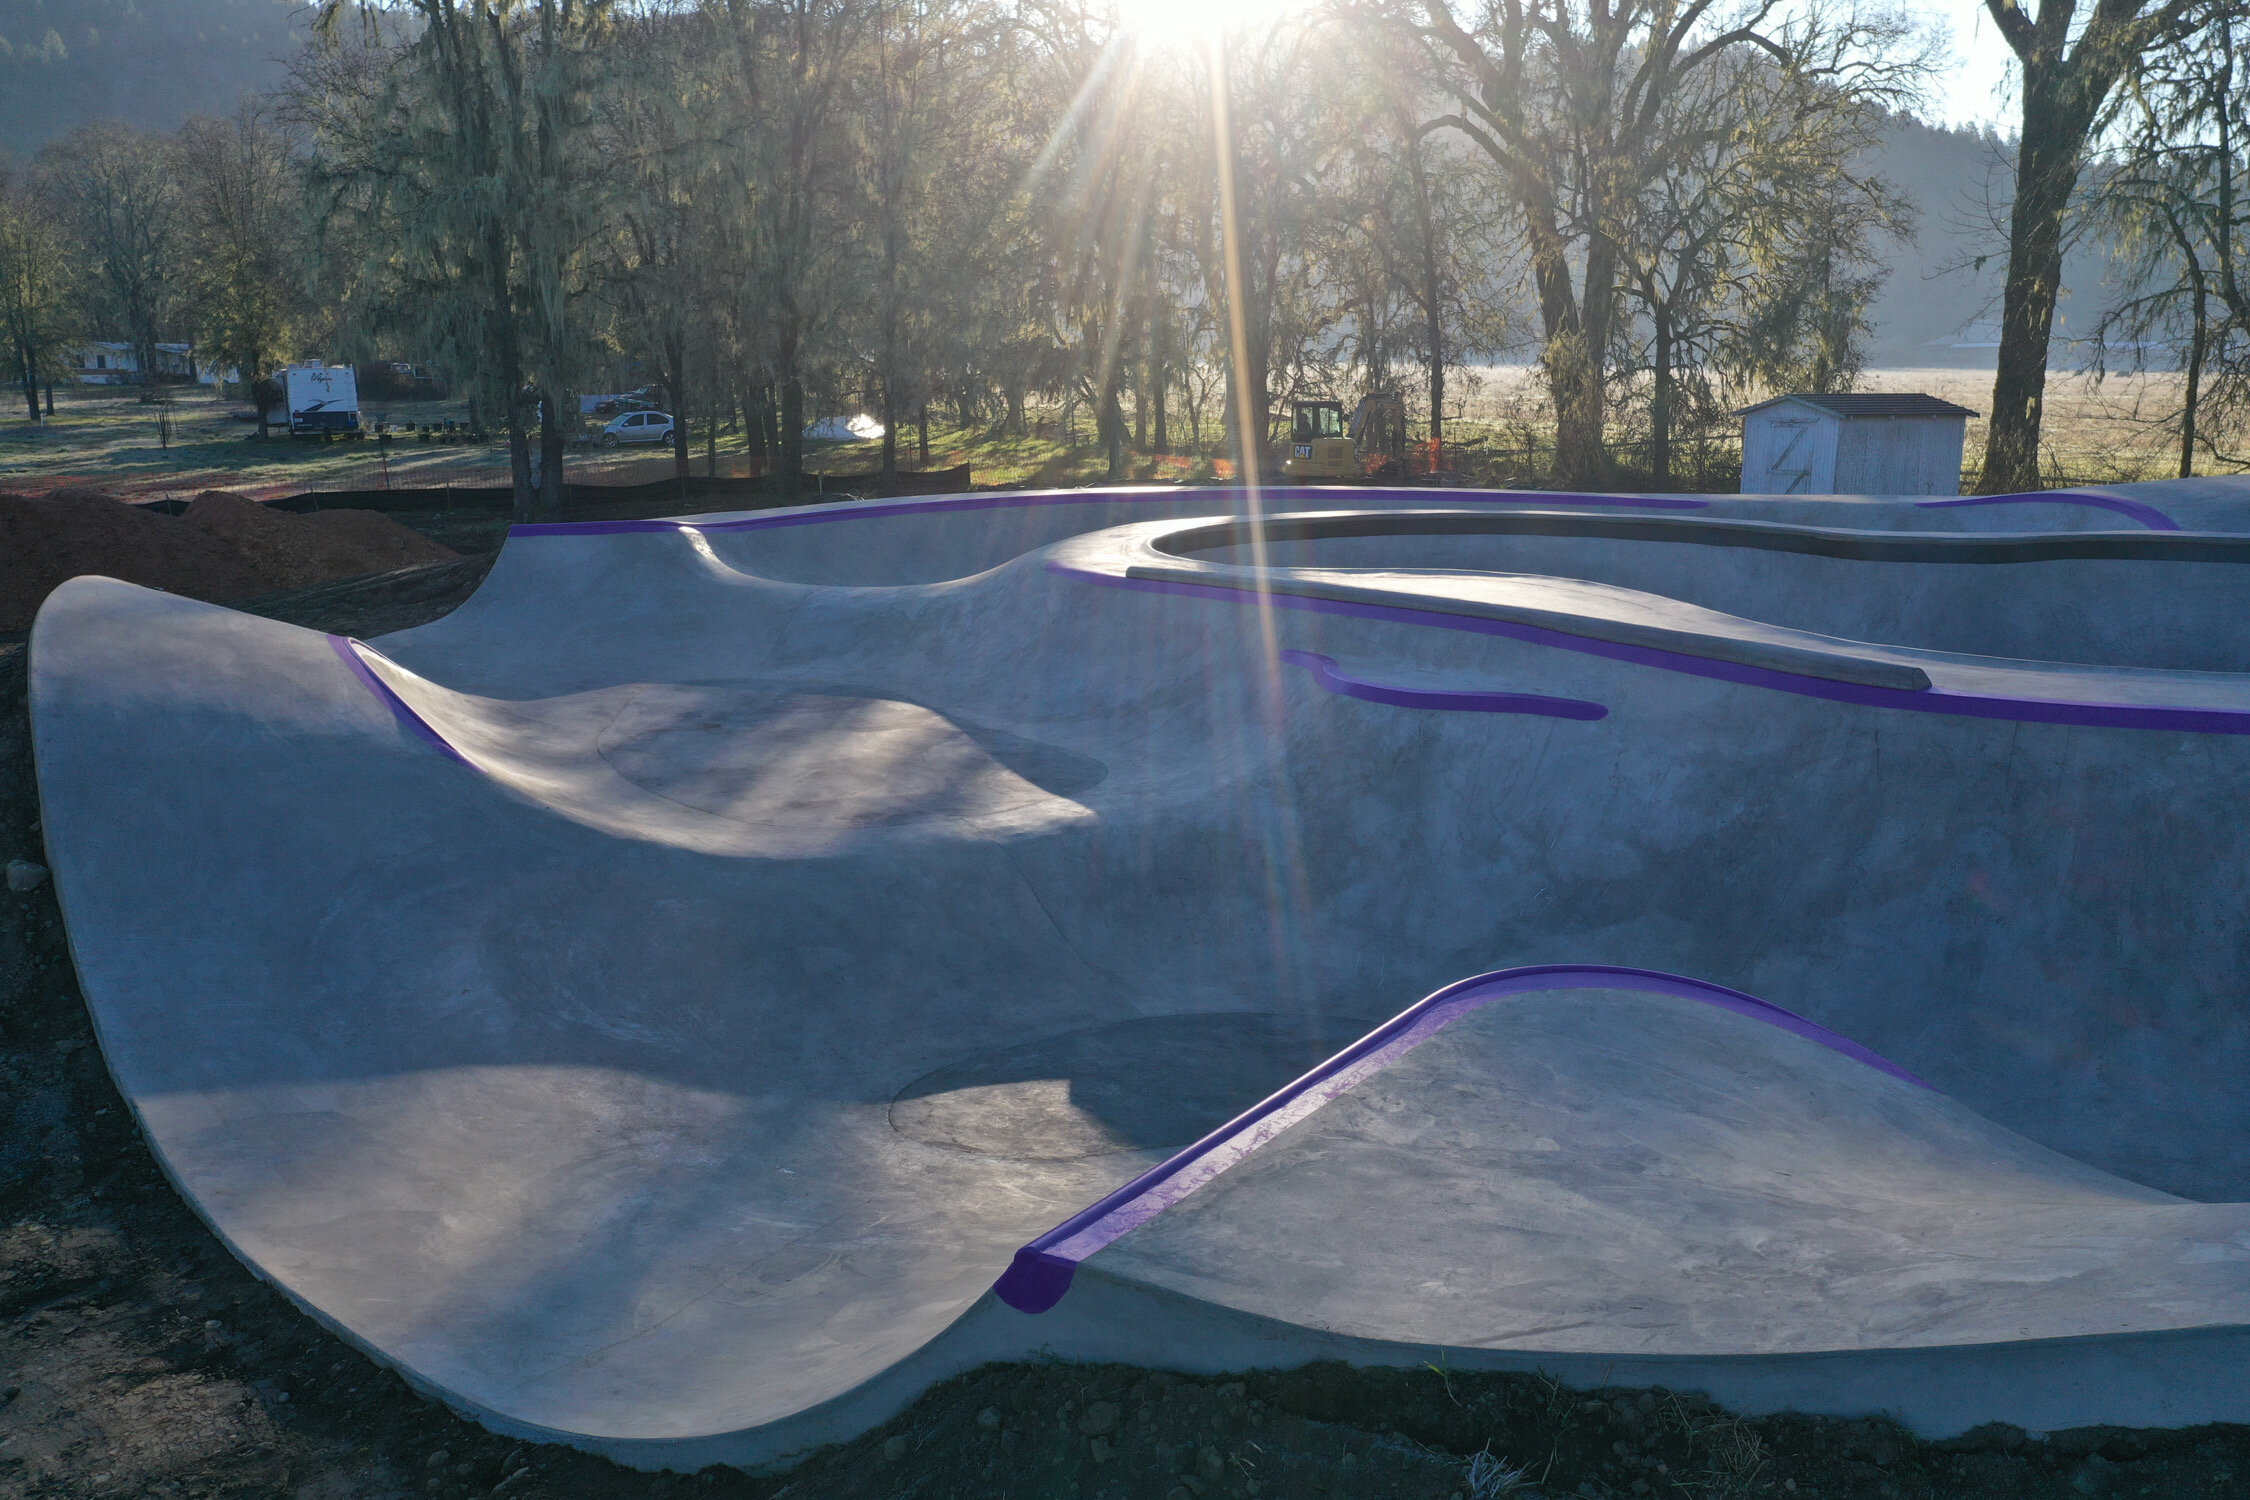 All the fun shapes 🪐 Northern California’s newest skate spot